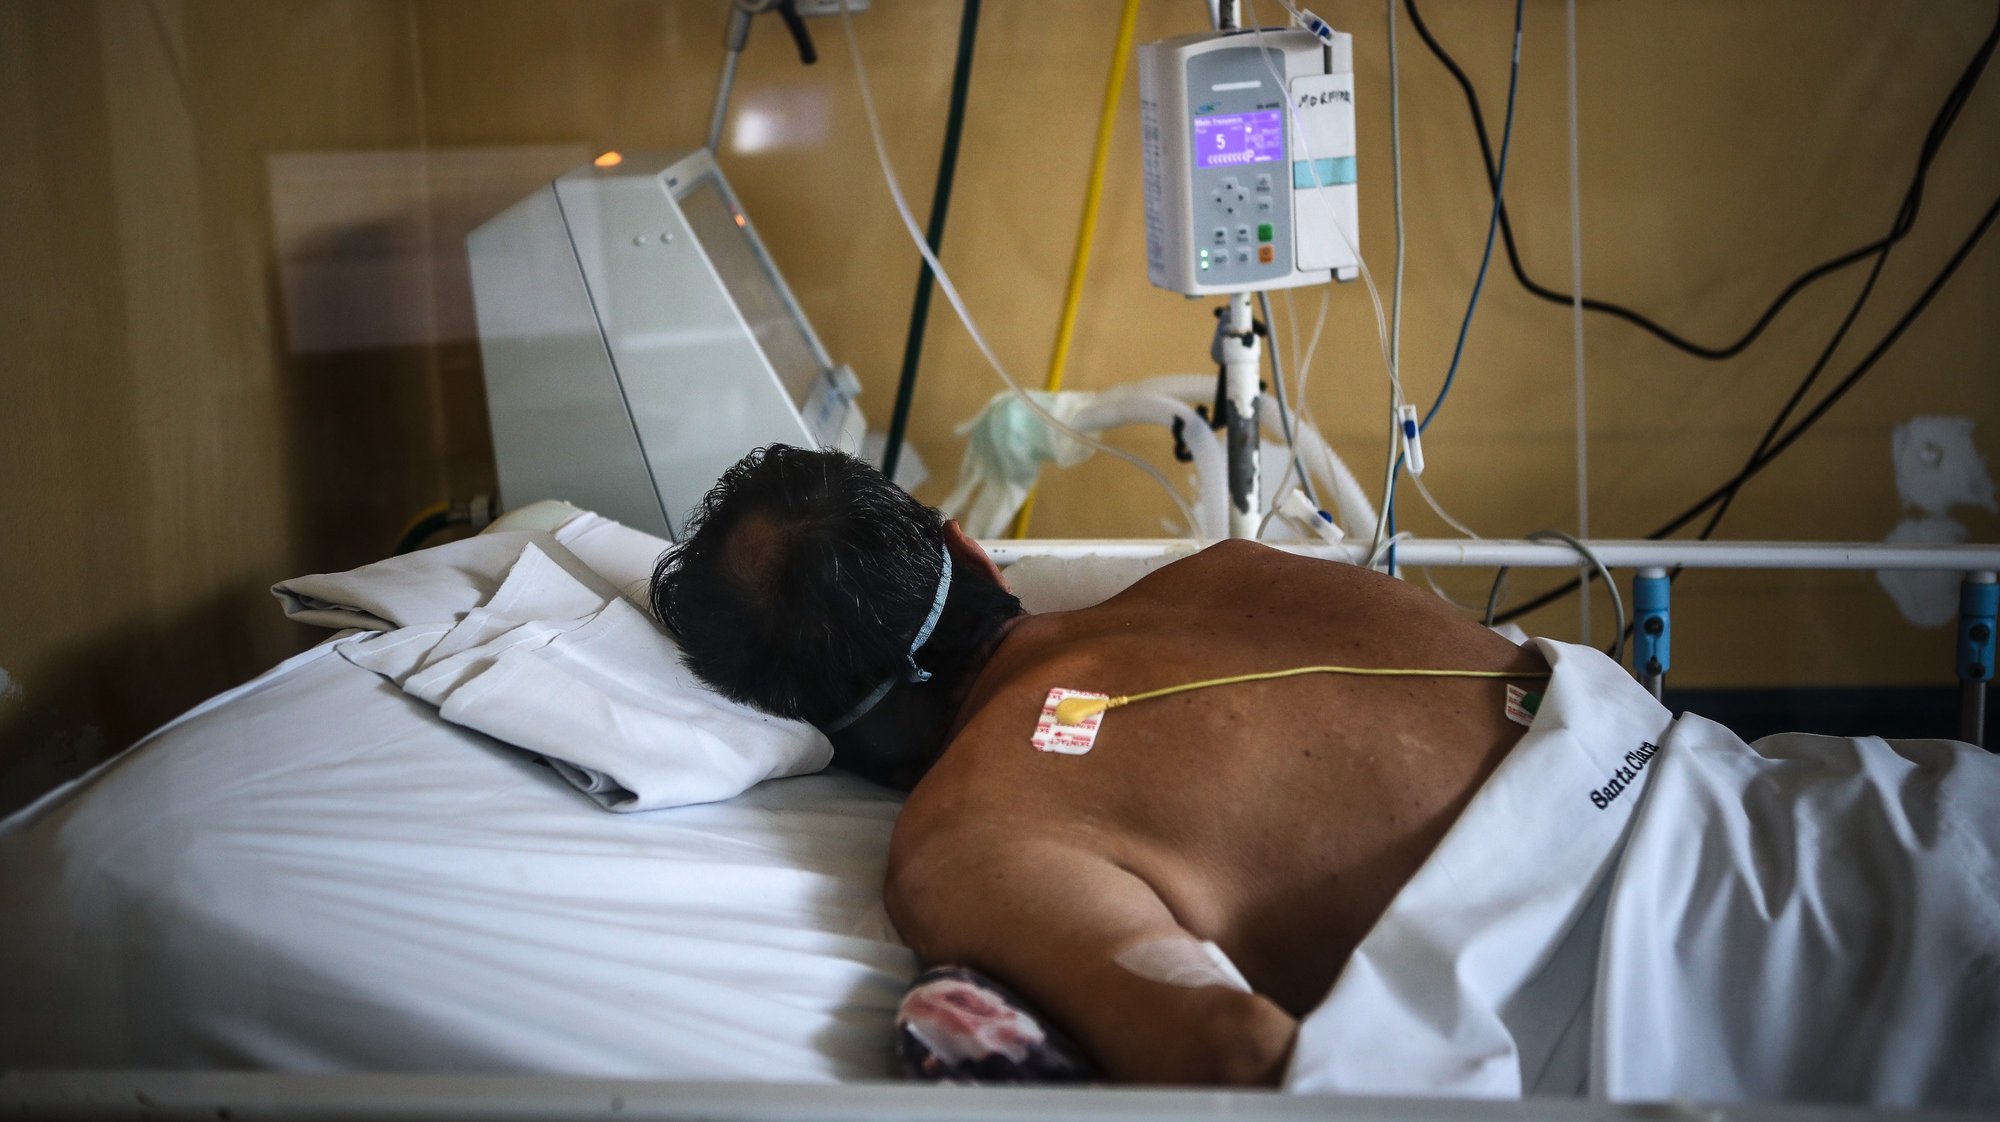 epa09175903 A pacient lies on bed as medical staff work at an intensive care unit in a hospital in Buenos Aires, Argentina, 28 April 2021 (issued 03 May 2021). Argentina enters a new stage of measures to stop the second wave of covid-19 and avoid health chaos, which include older people restrictions, especially in the metropolitan area of Buenos Aires, the most affected by the virus.  EPA/Juan Ignacio RONCORONI